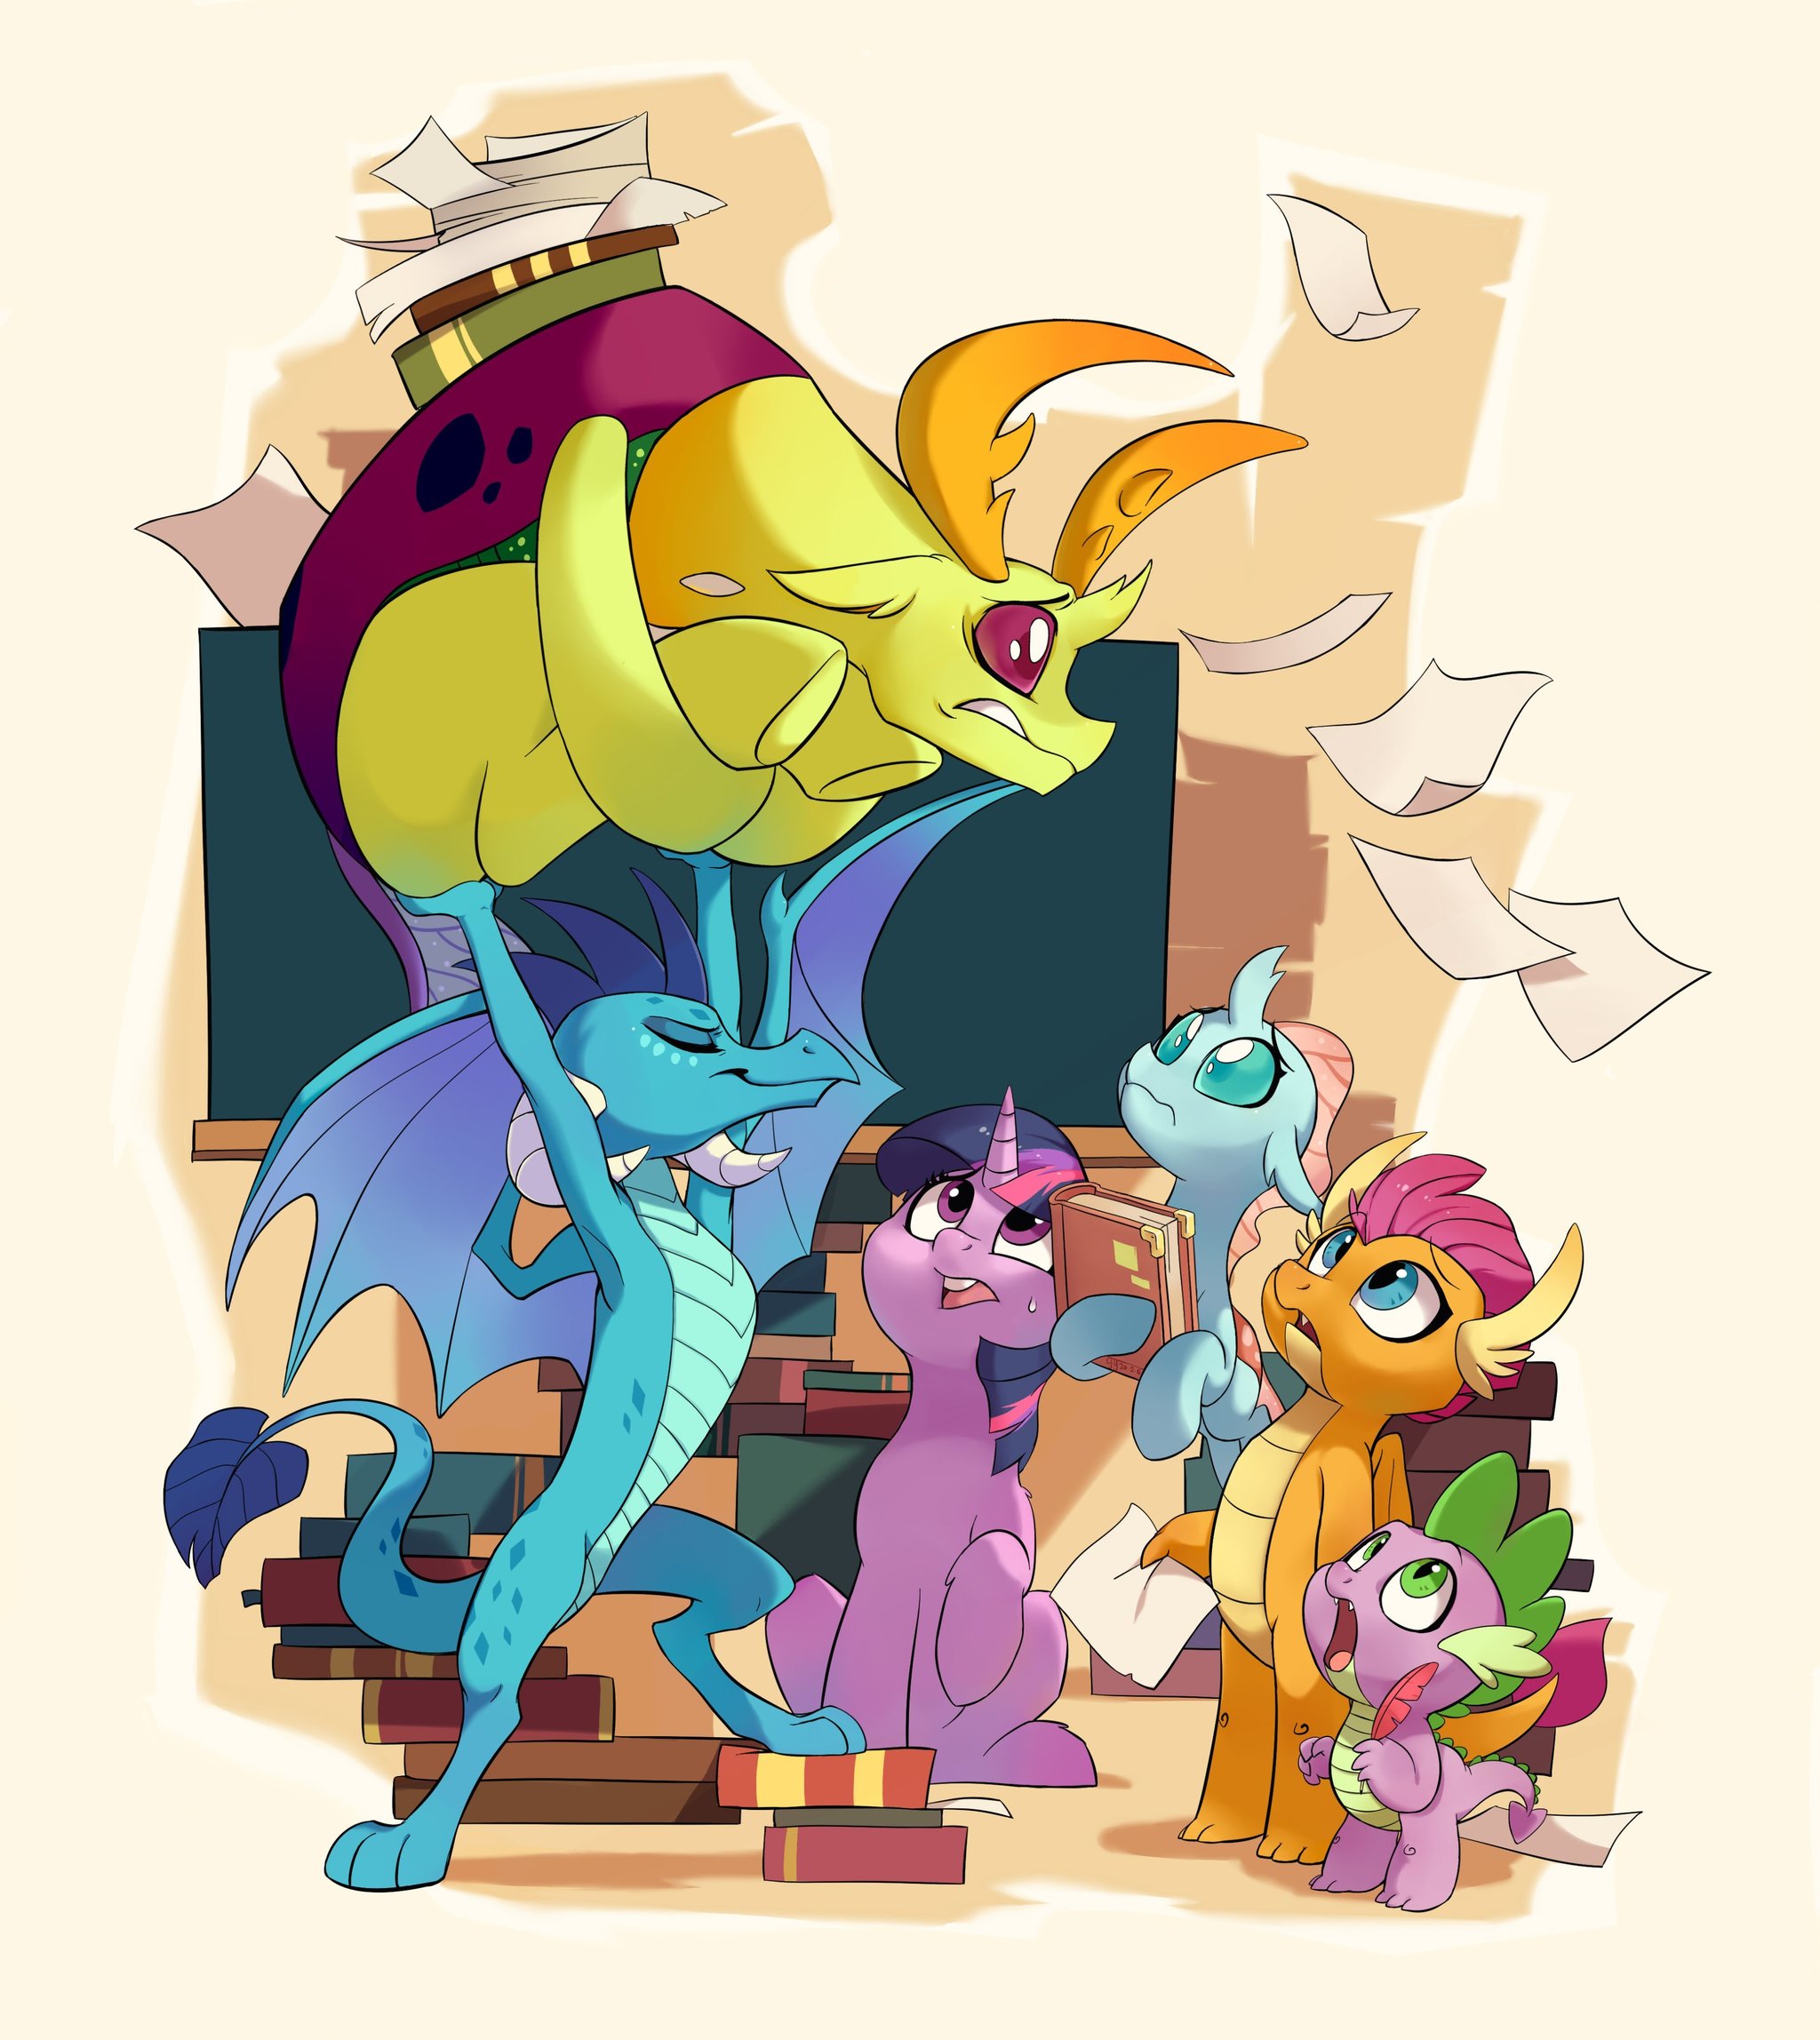 Dragons power - My little pony, Princess ember, Twilight sparkle, Thorax, Ocellus, Smolder, Spike, The Dragon